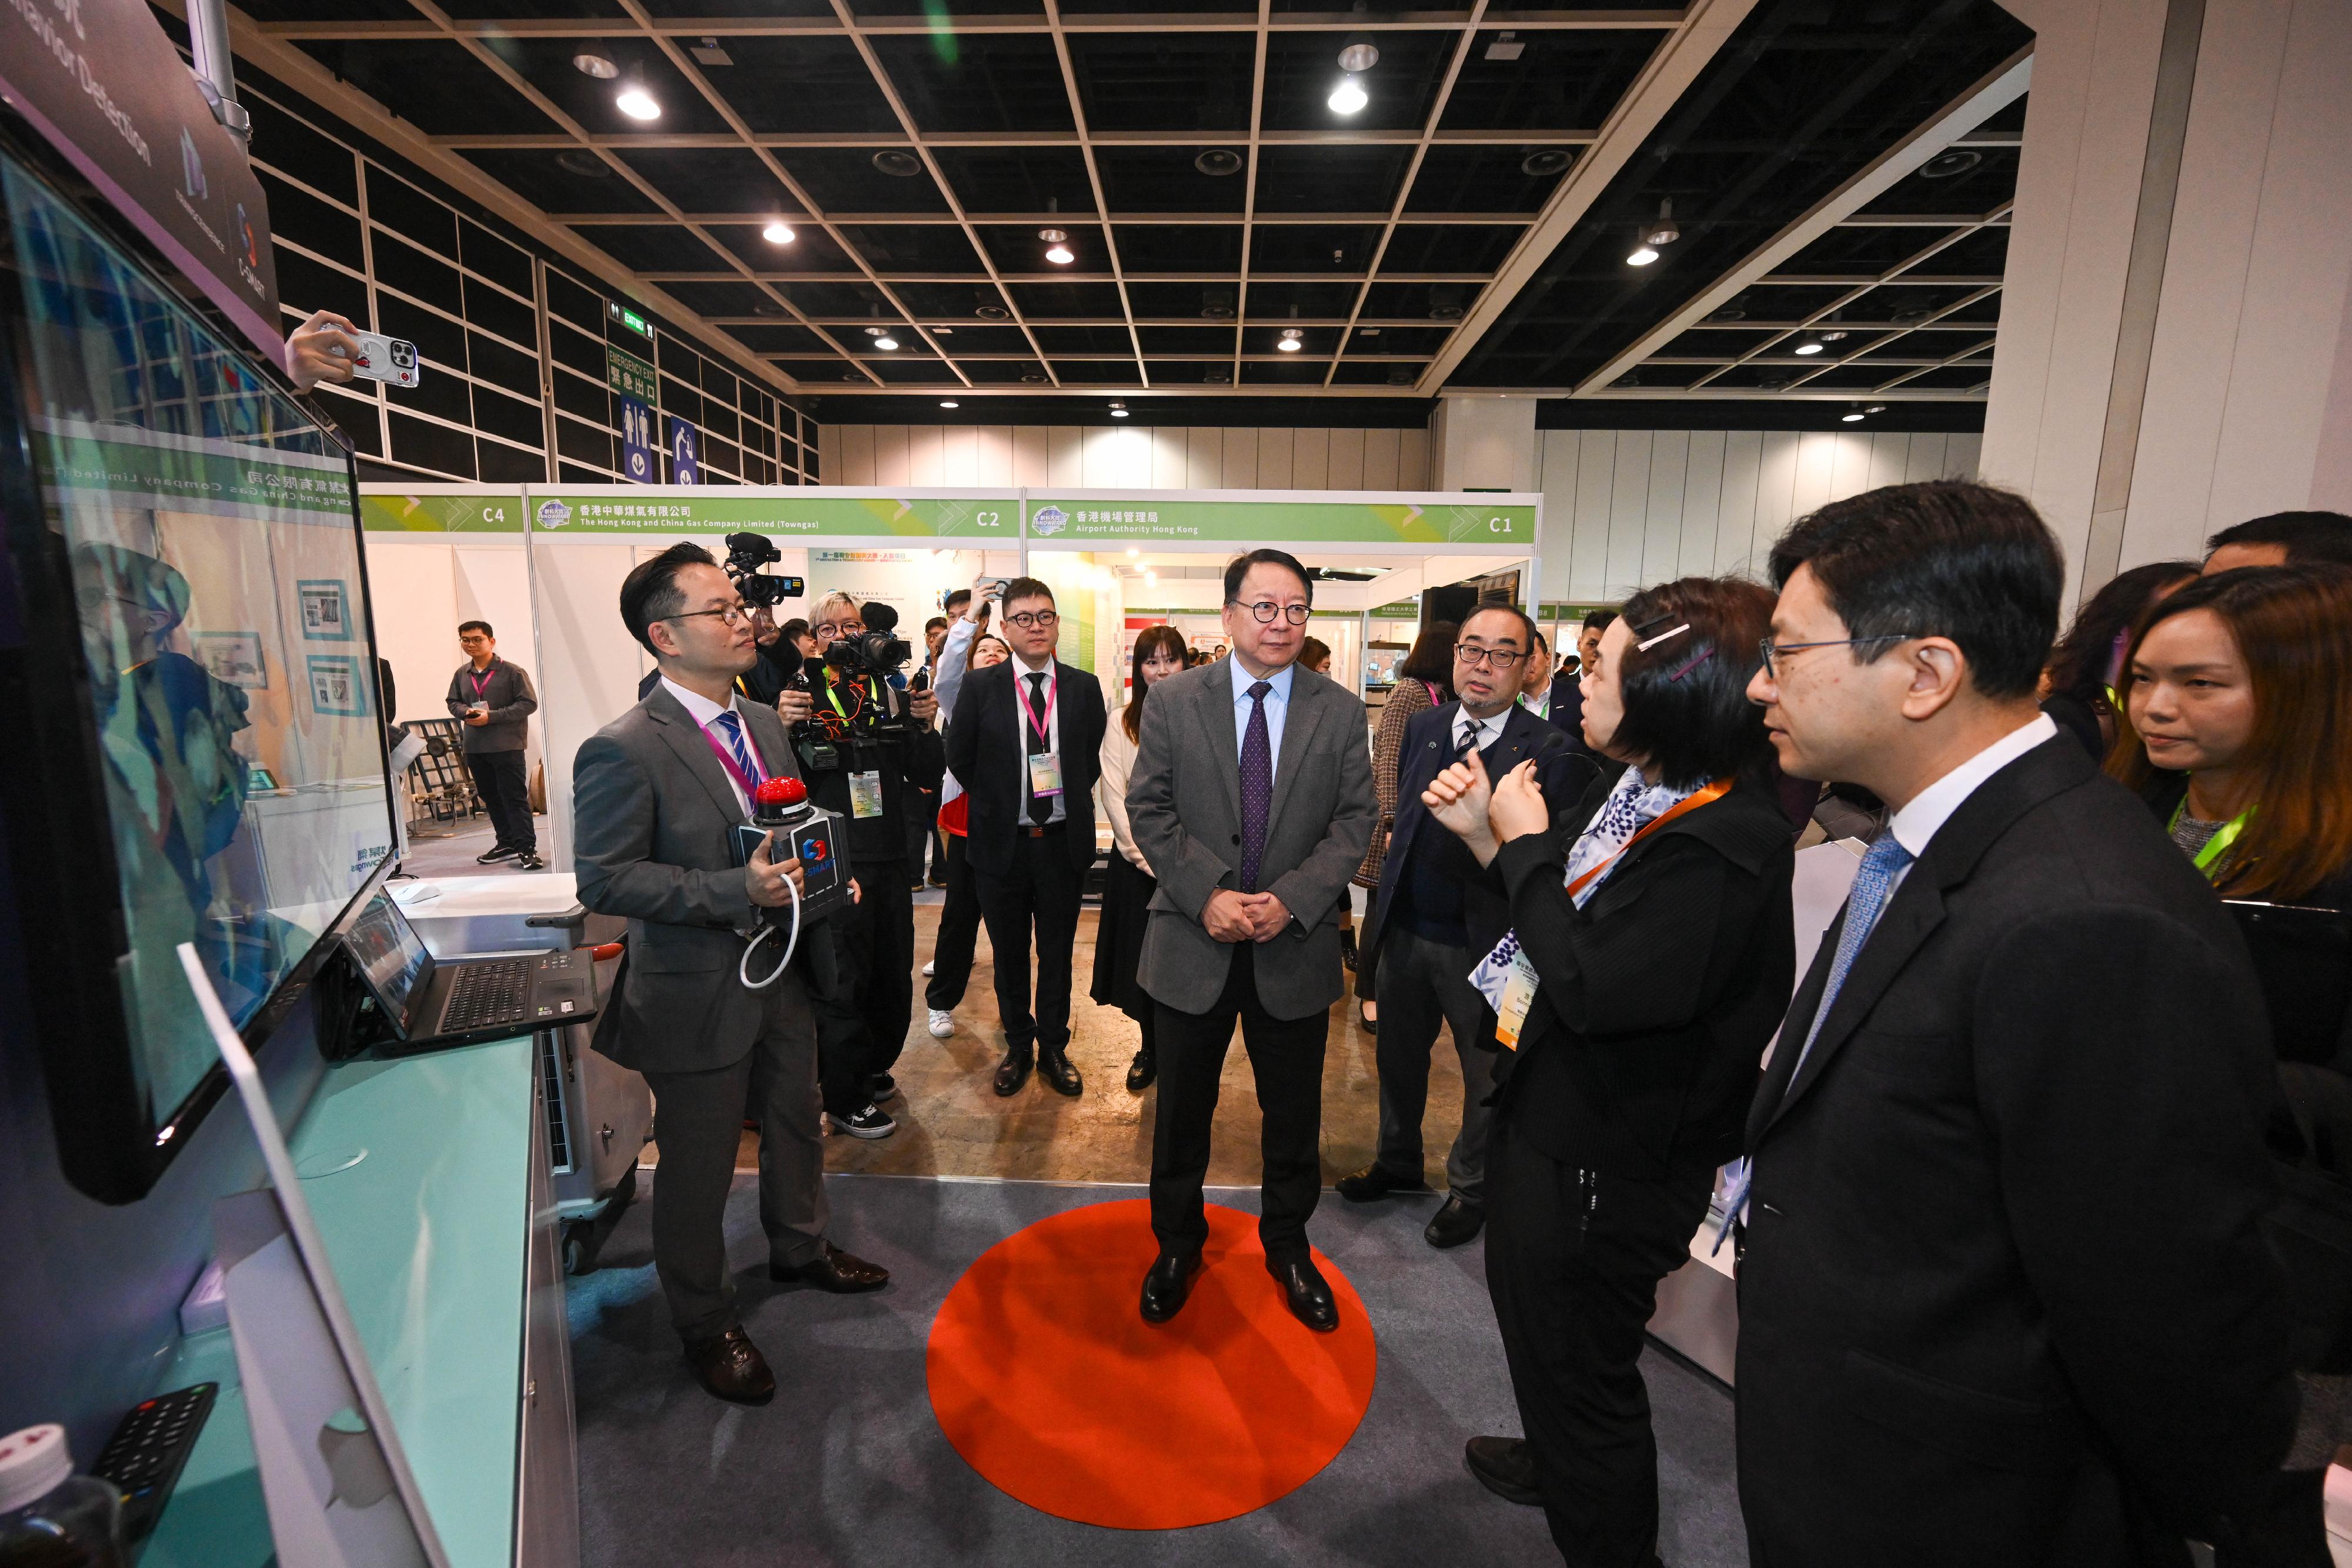 The Chief Secretary for Administration, Mr Chan Kwok-ki, attended the opening ceremony of the OSH Innovation & Technology Expo today (March 7). Photo shows Mr Chan (fifth right) touring the exhibition.

